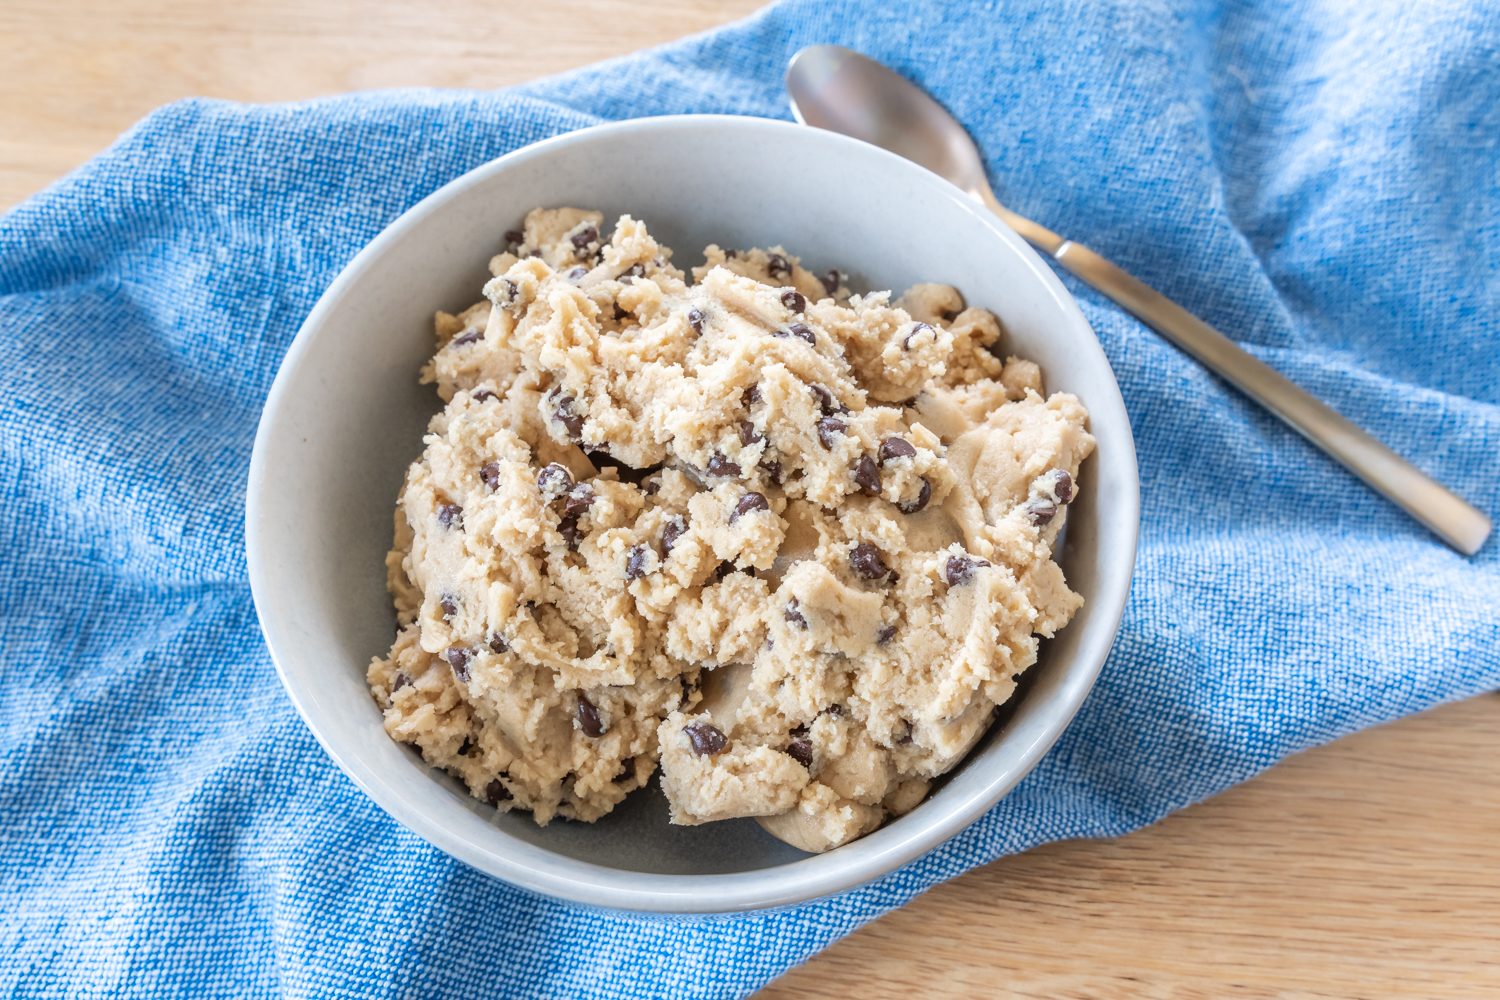 How to Make an Edible Cookie Dough Recipe | Taste of Home